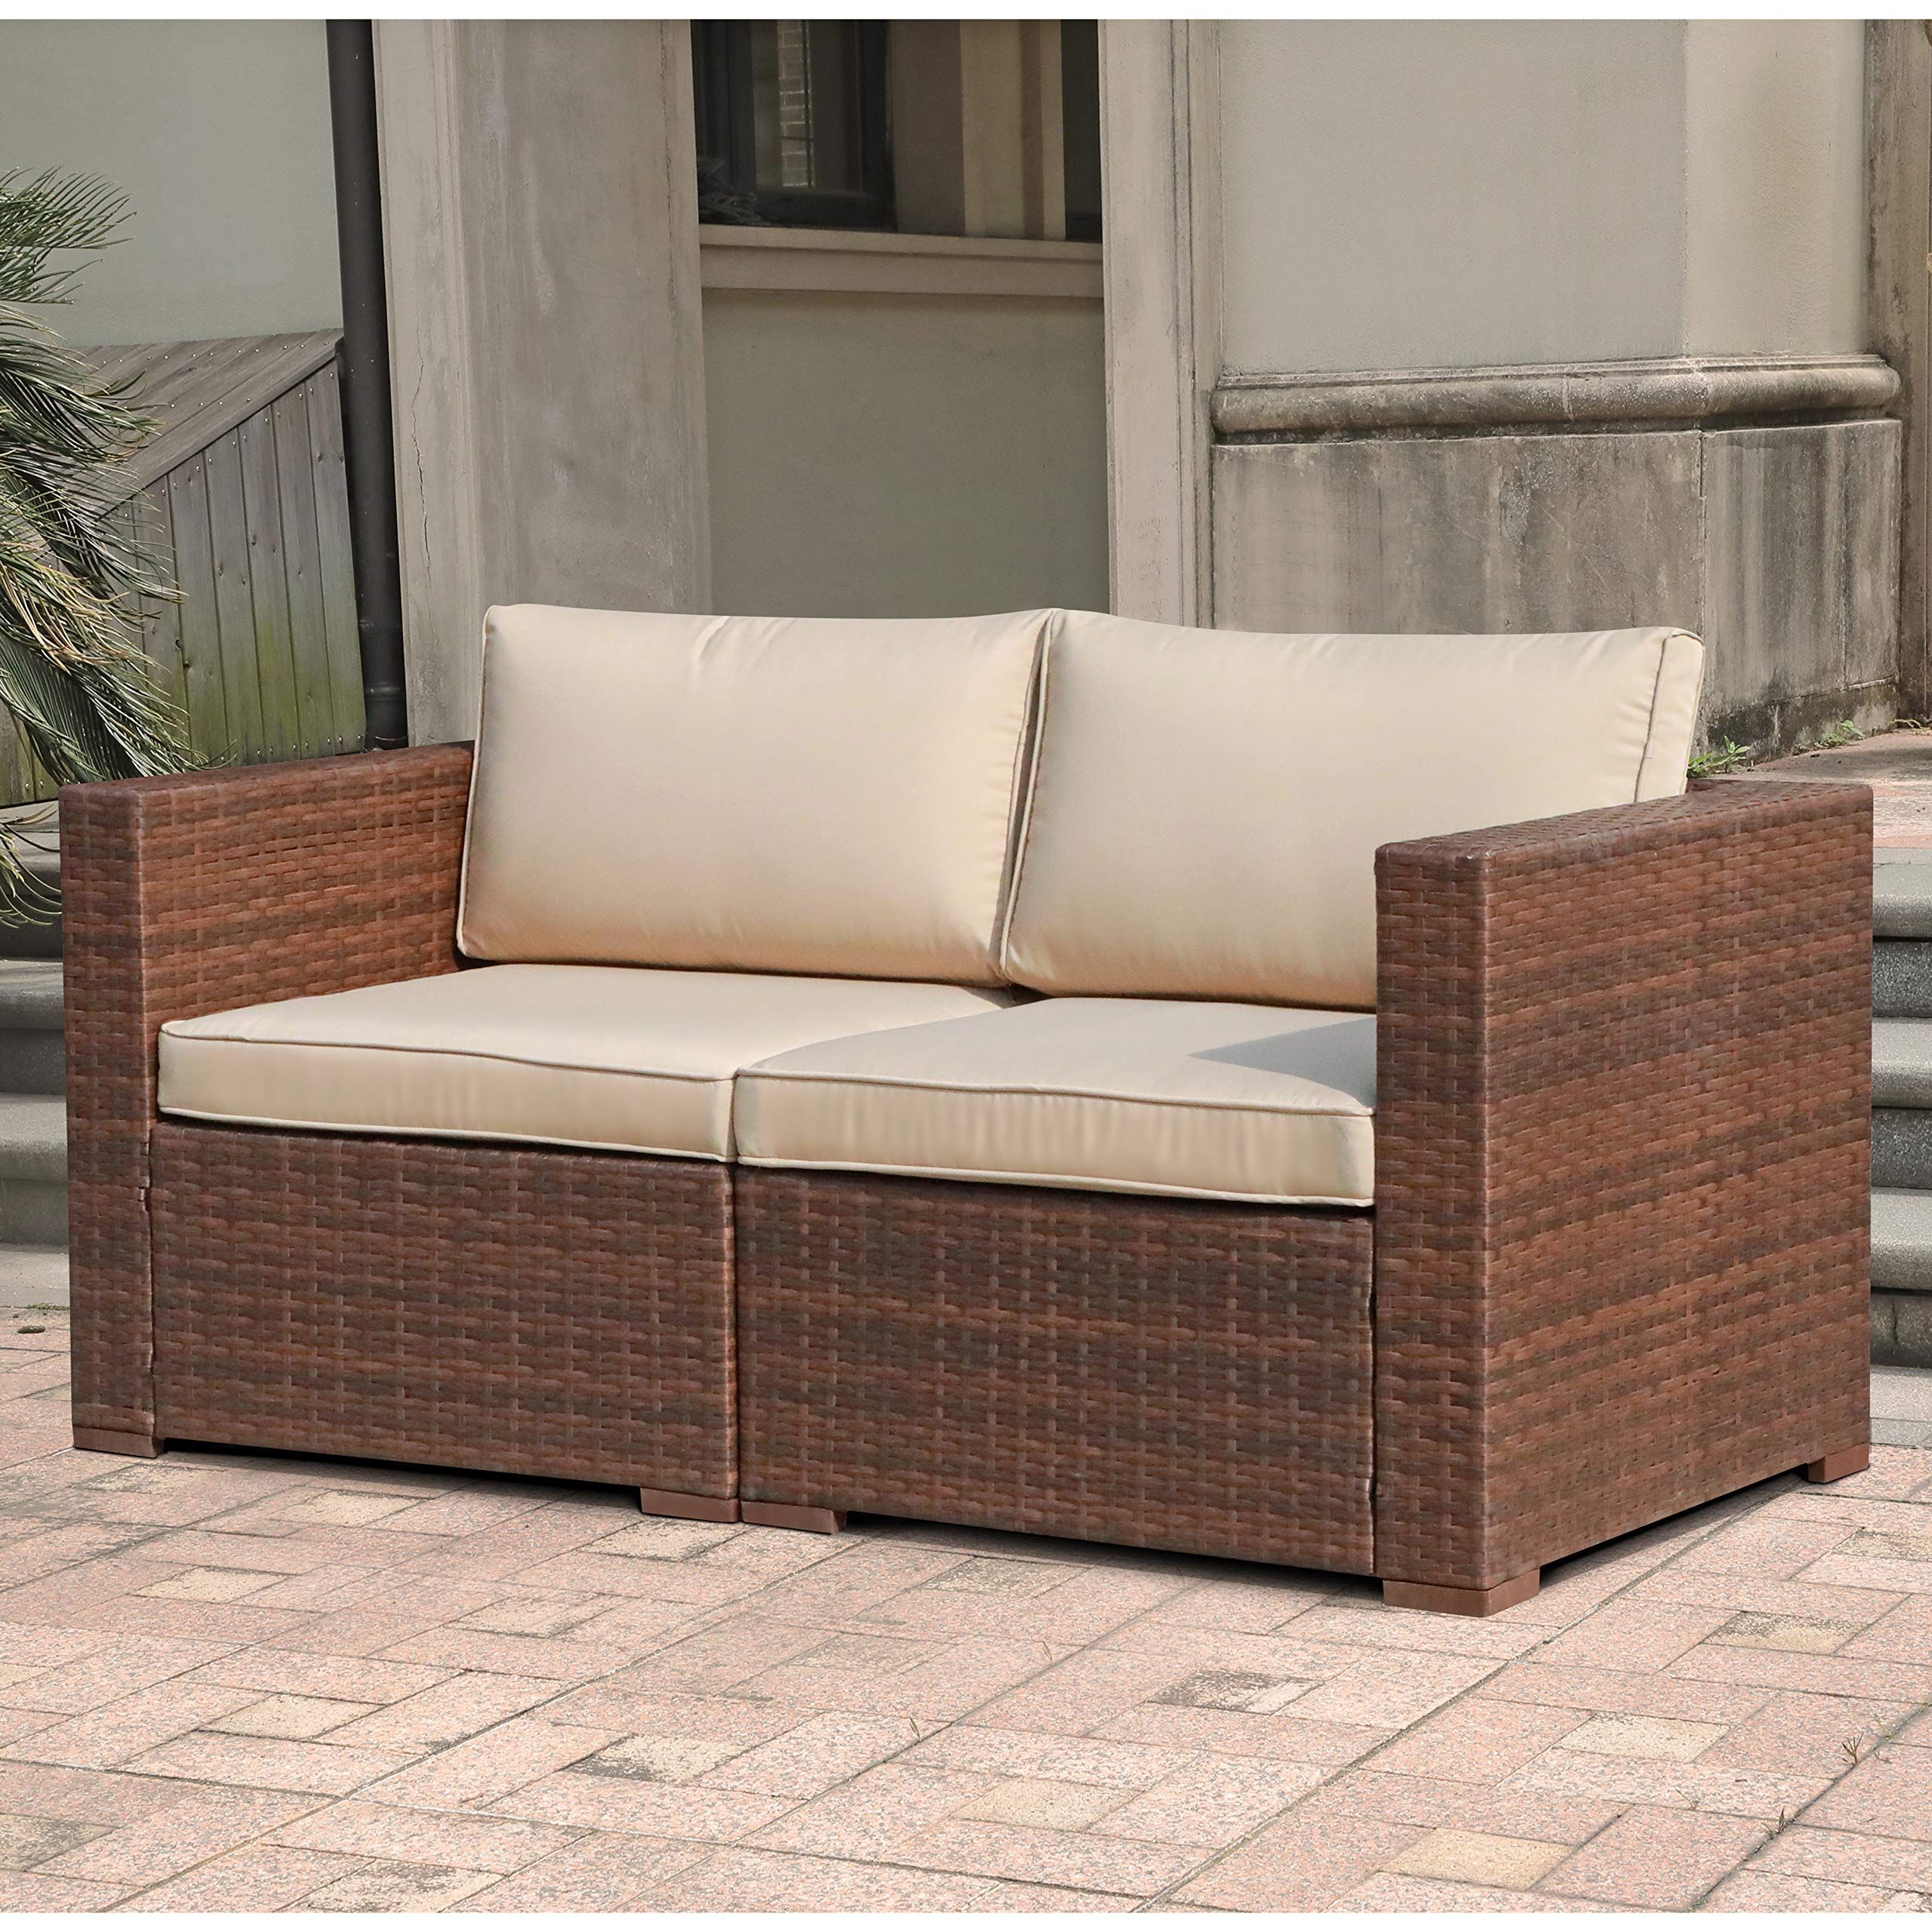 Preferred Loveseat Chairs For Backyard Inside Amazon : Super Patio Loveseat, 2 Piece Outdoor Furniture Set, All  Weather Wicker Loveseat Corner Sofas Thick Beige Cushions, Steel Frame,  Brown : Patio, Lawn & Garden (Photo 8 of 15)